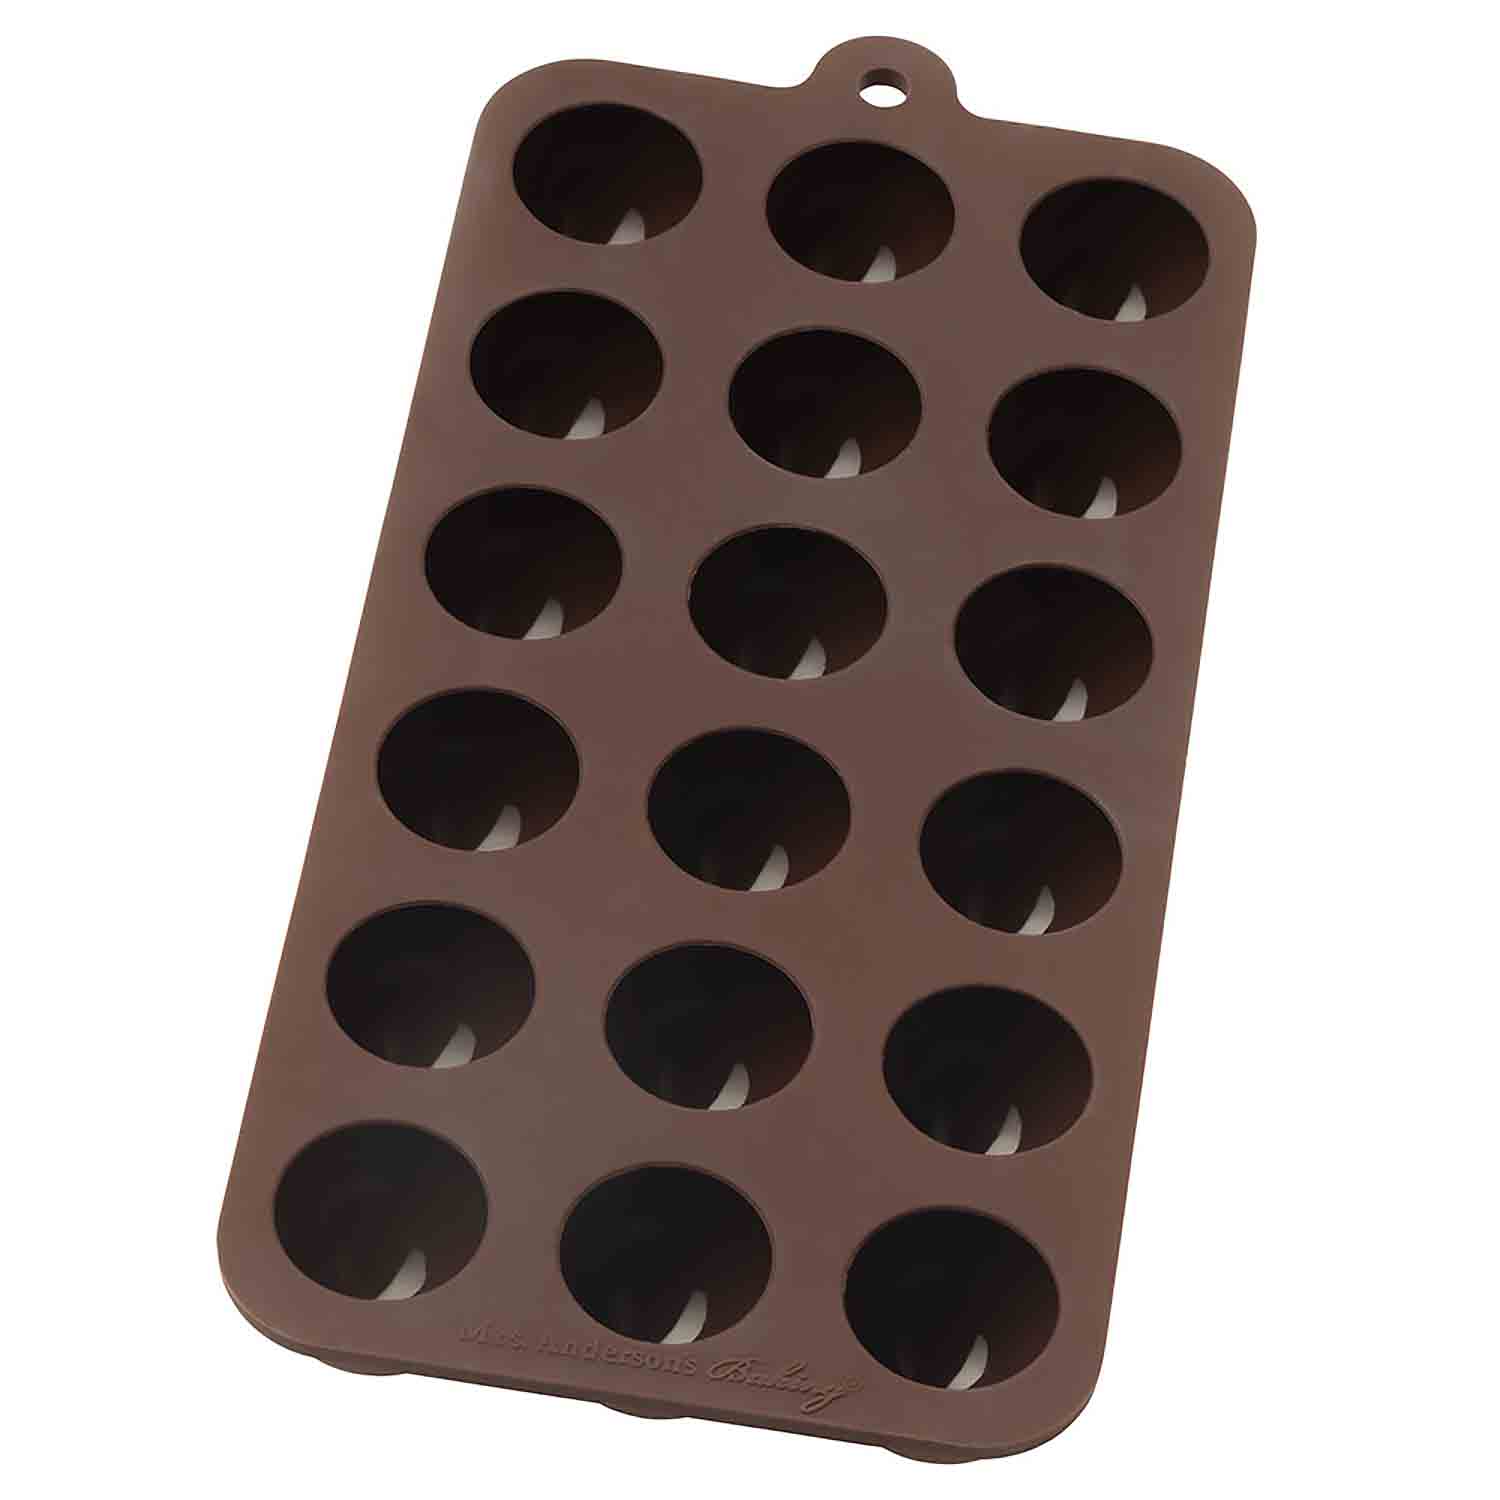 12-Cavity Square Caramel Candy Silicone Molds,Chocolate Truffles